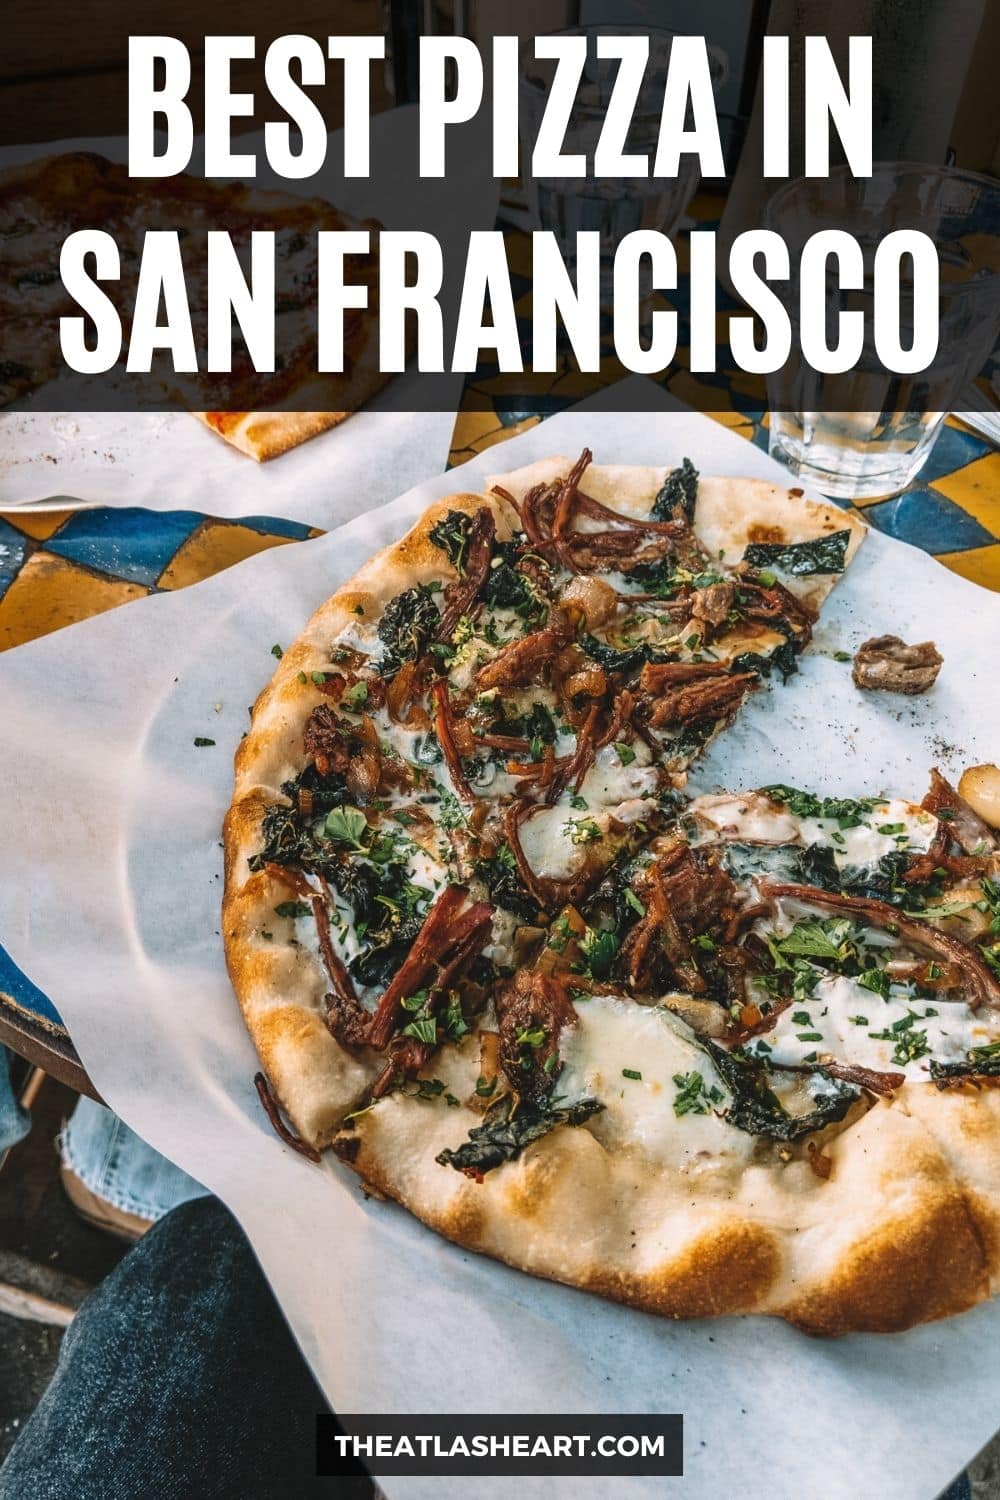 23 Best Pizza Places in San Francisco: Find the Best Slice in the City